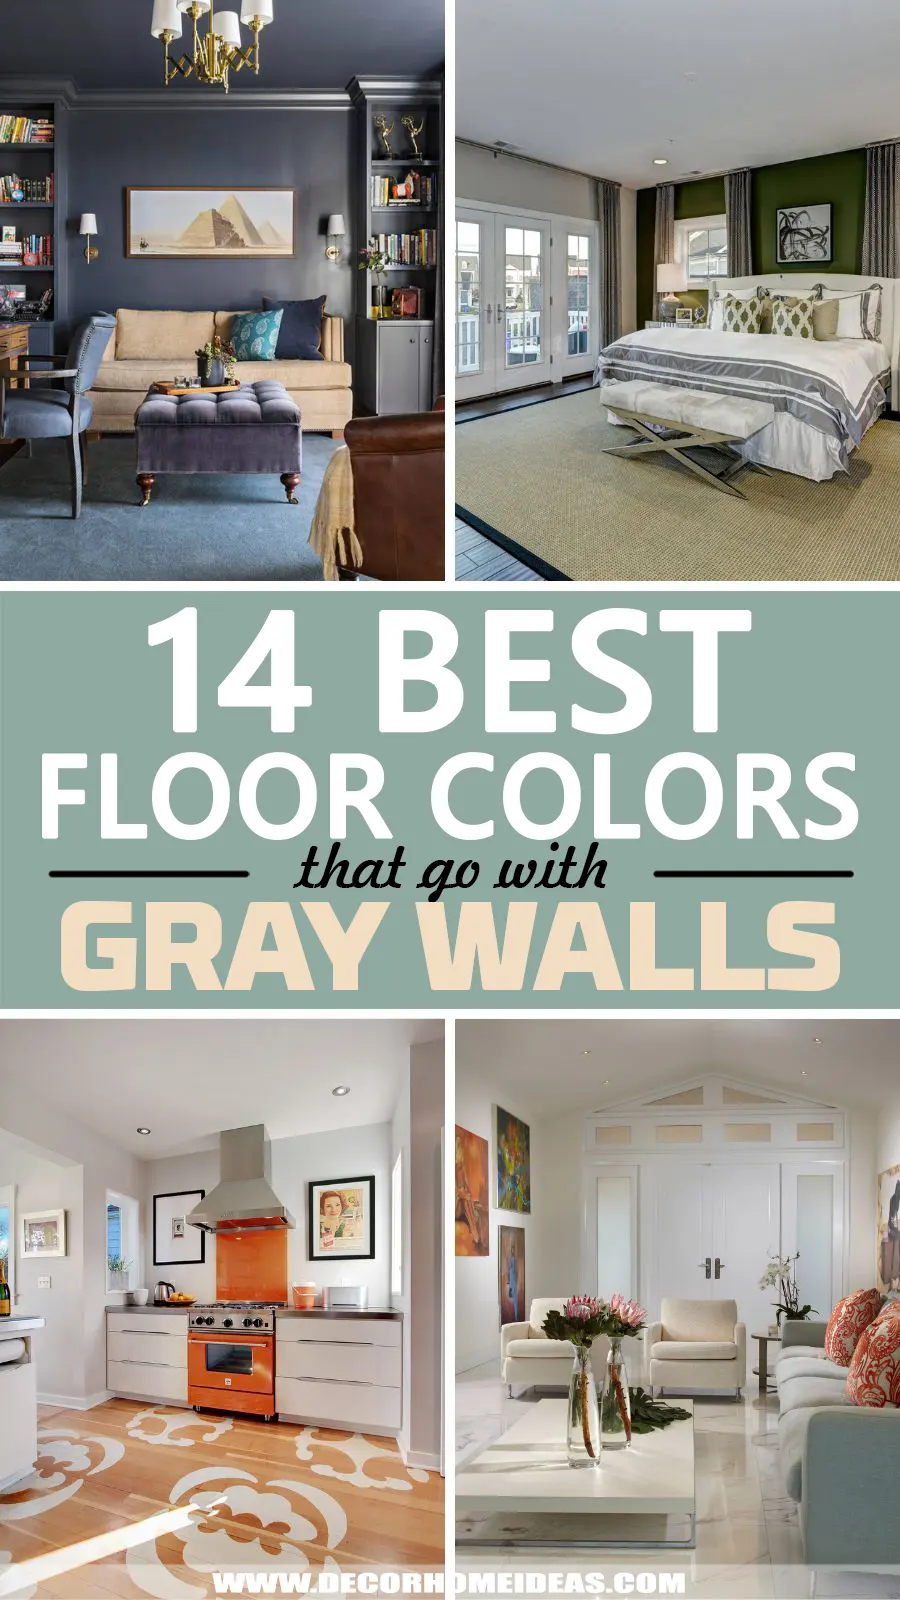 Best Floor Colors For Gray Walls. Not sure which is the best floor color for your gray walls? We have chosen the best ideas and color combinations to ensure you can perfectly match walls and floors.